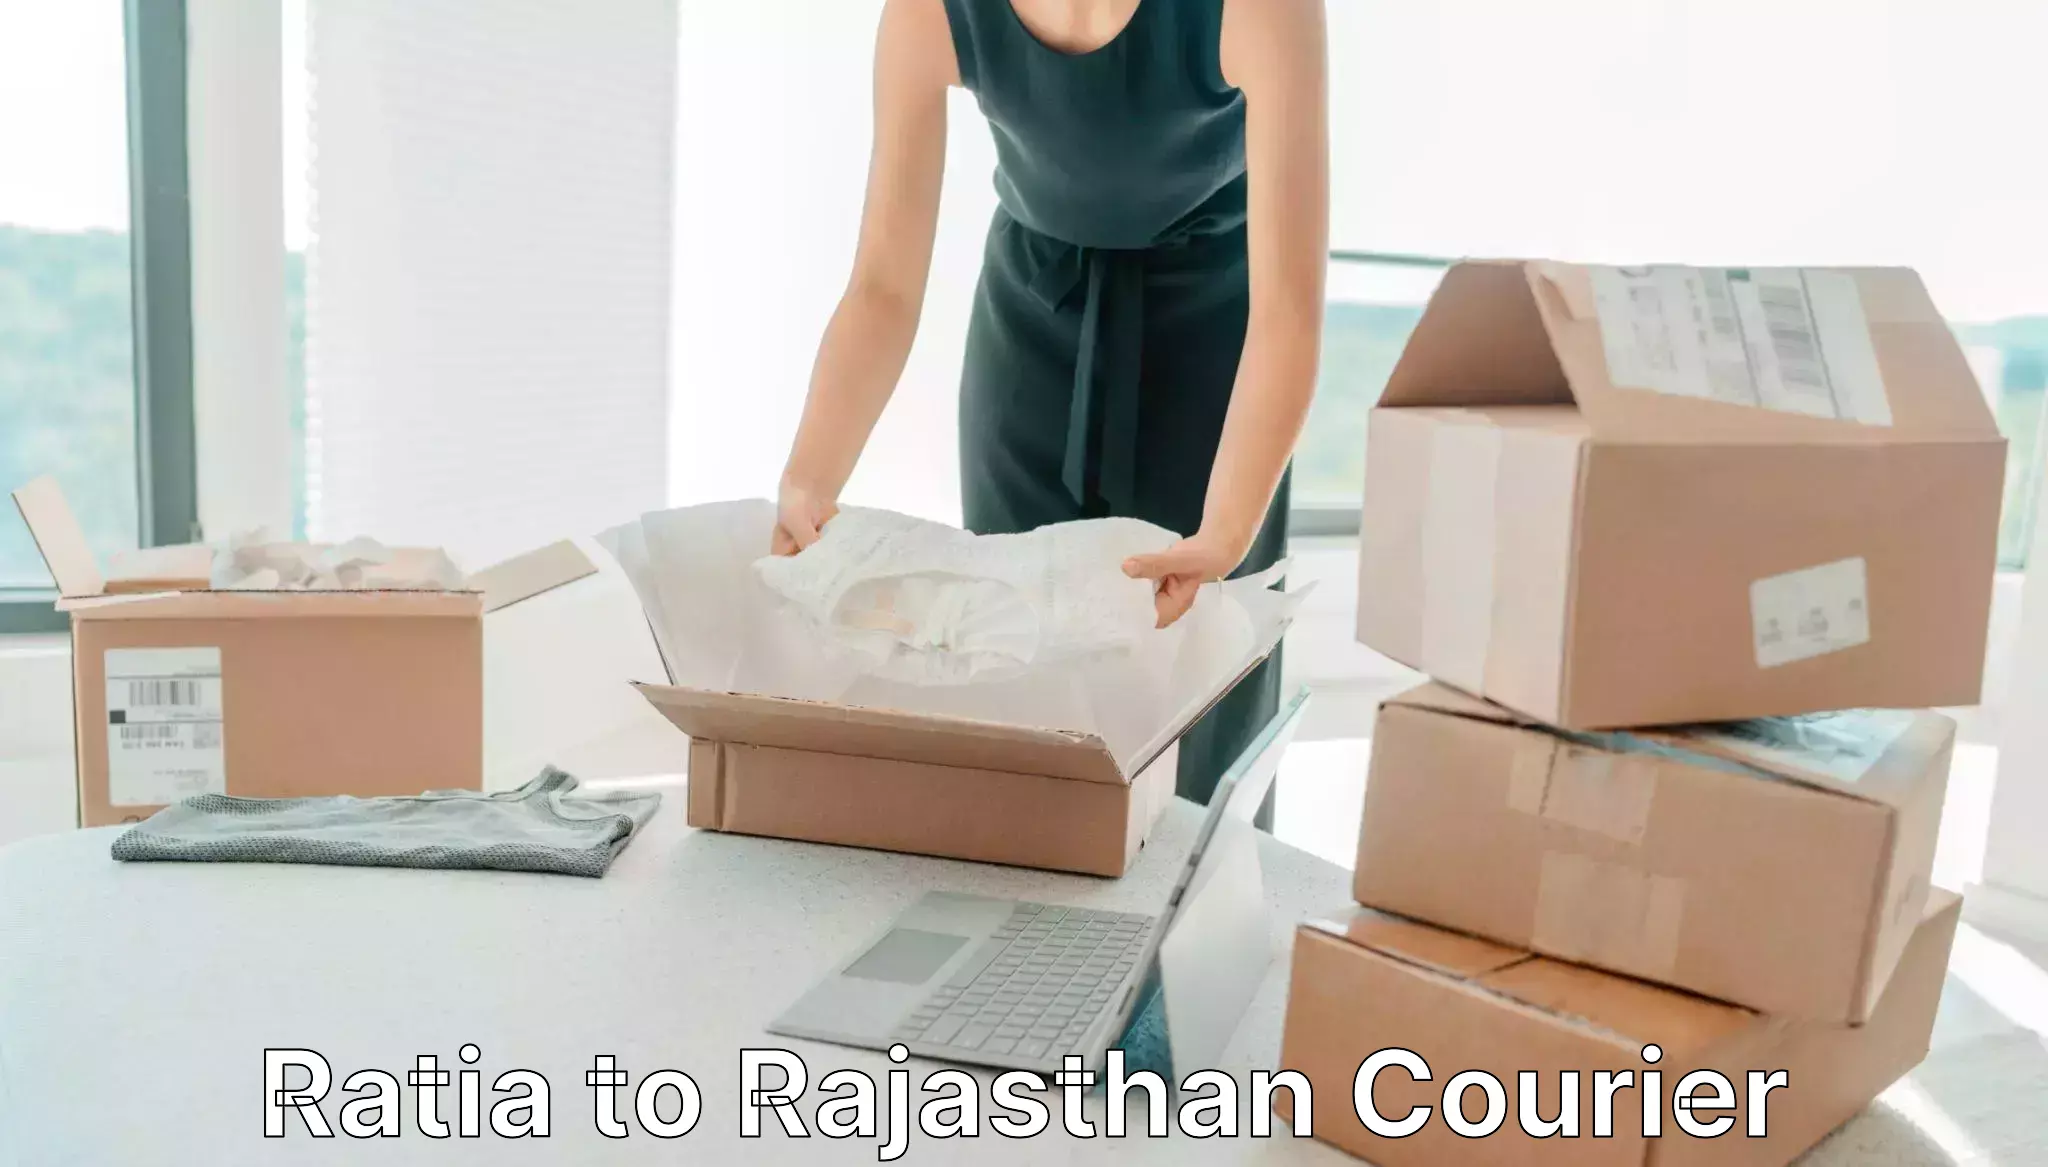 Sustainable courier practices Ratia to Buhana